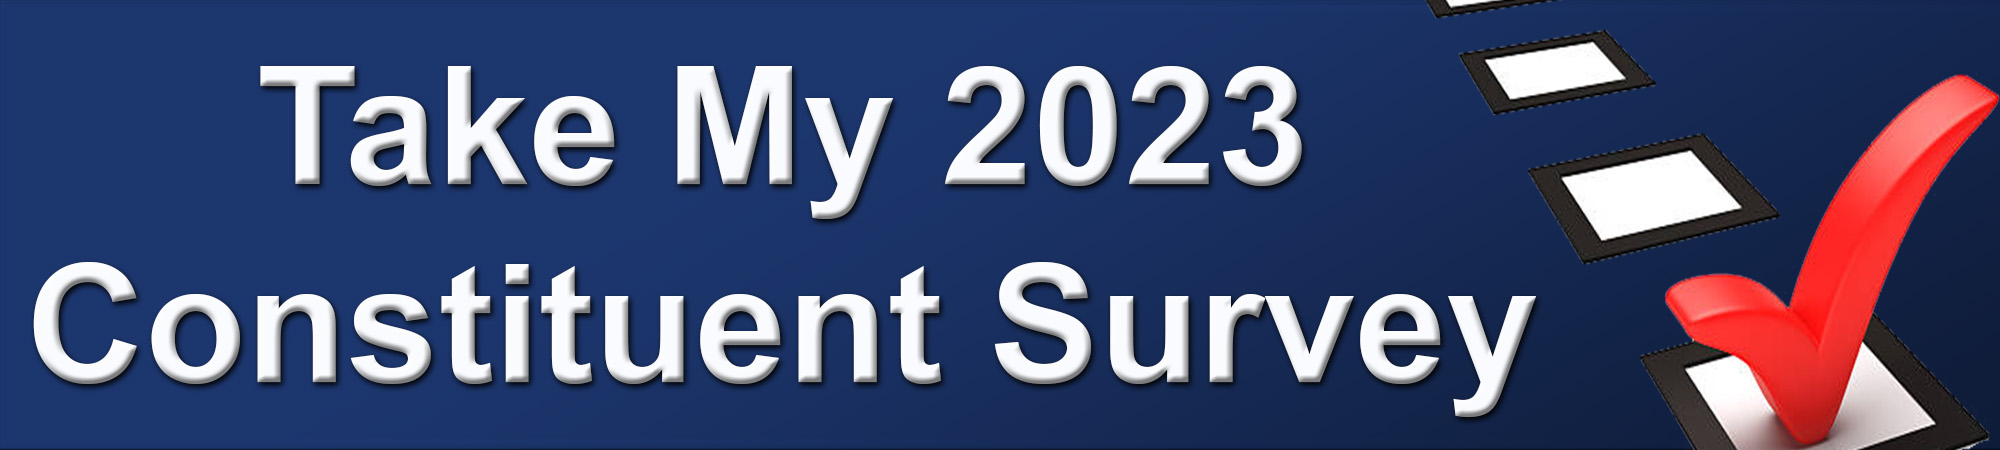 Take my 2023 Constituent Survey